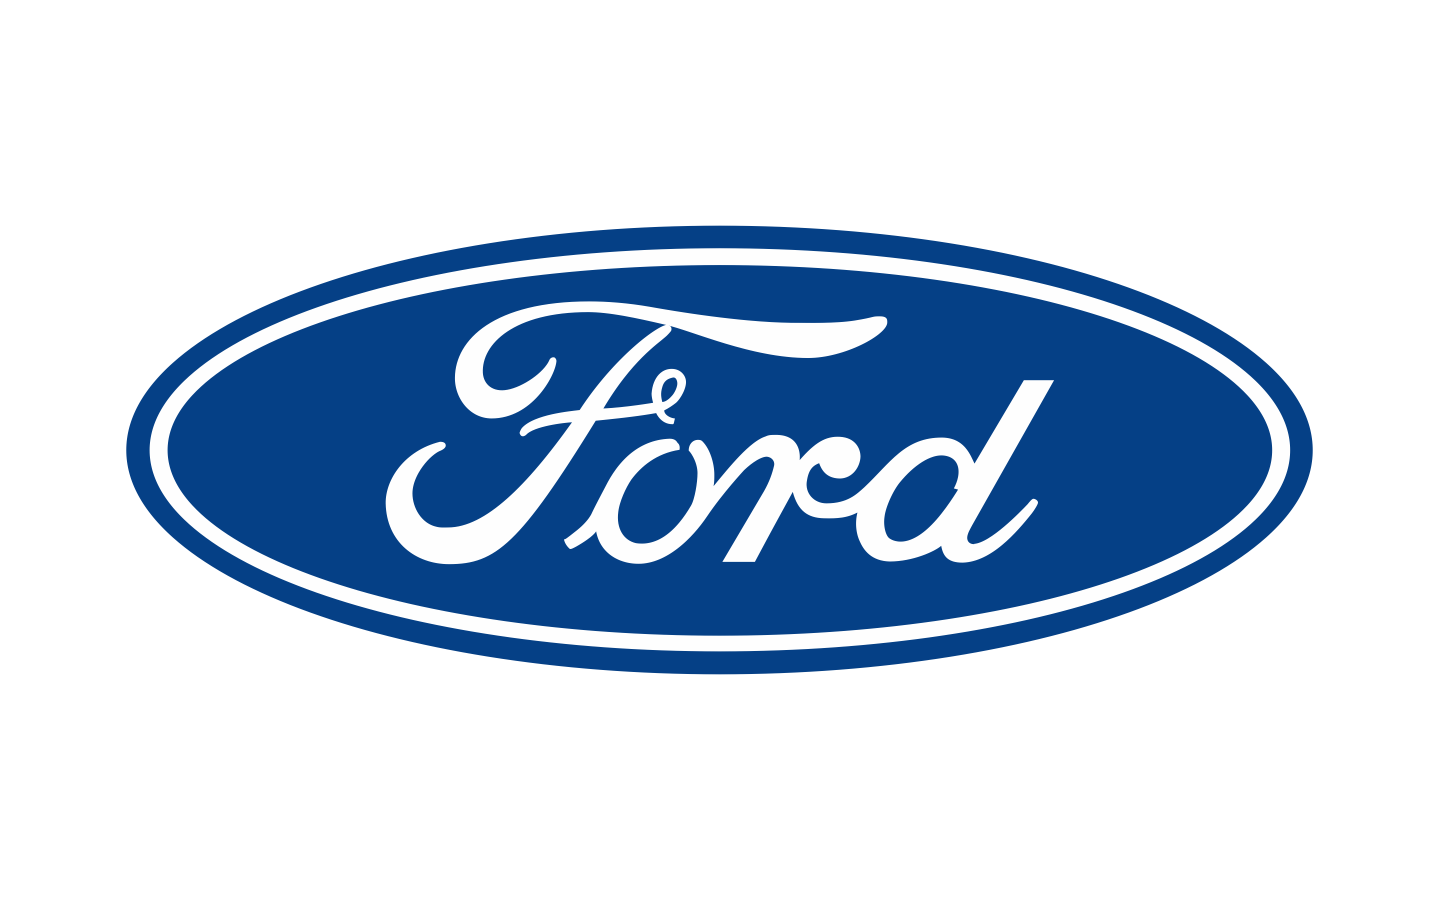 Ford Logo png Sports Car Wall